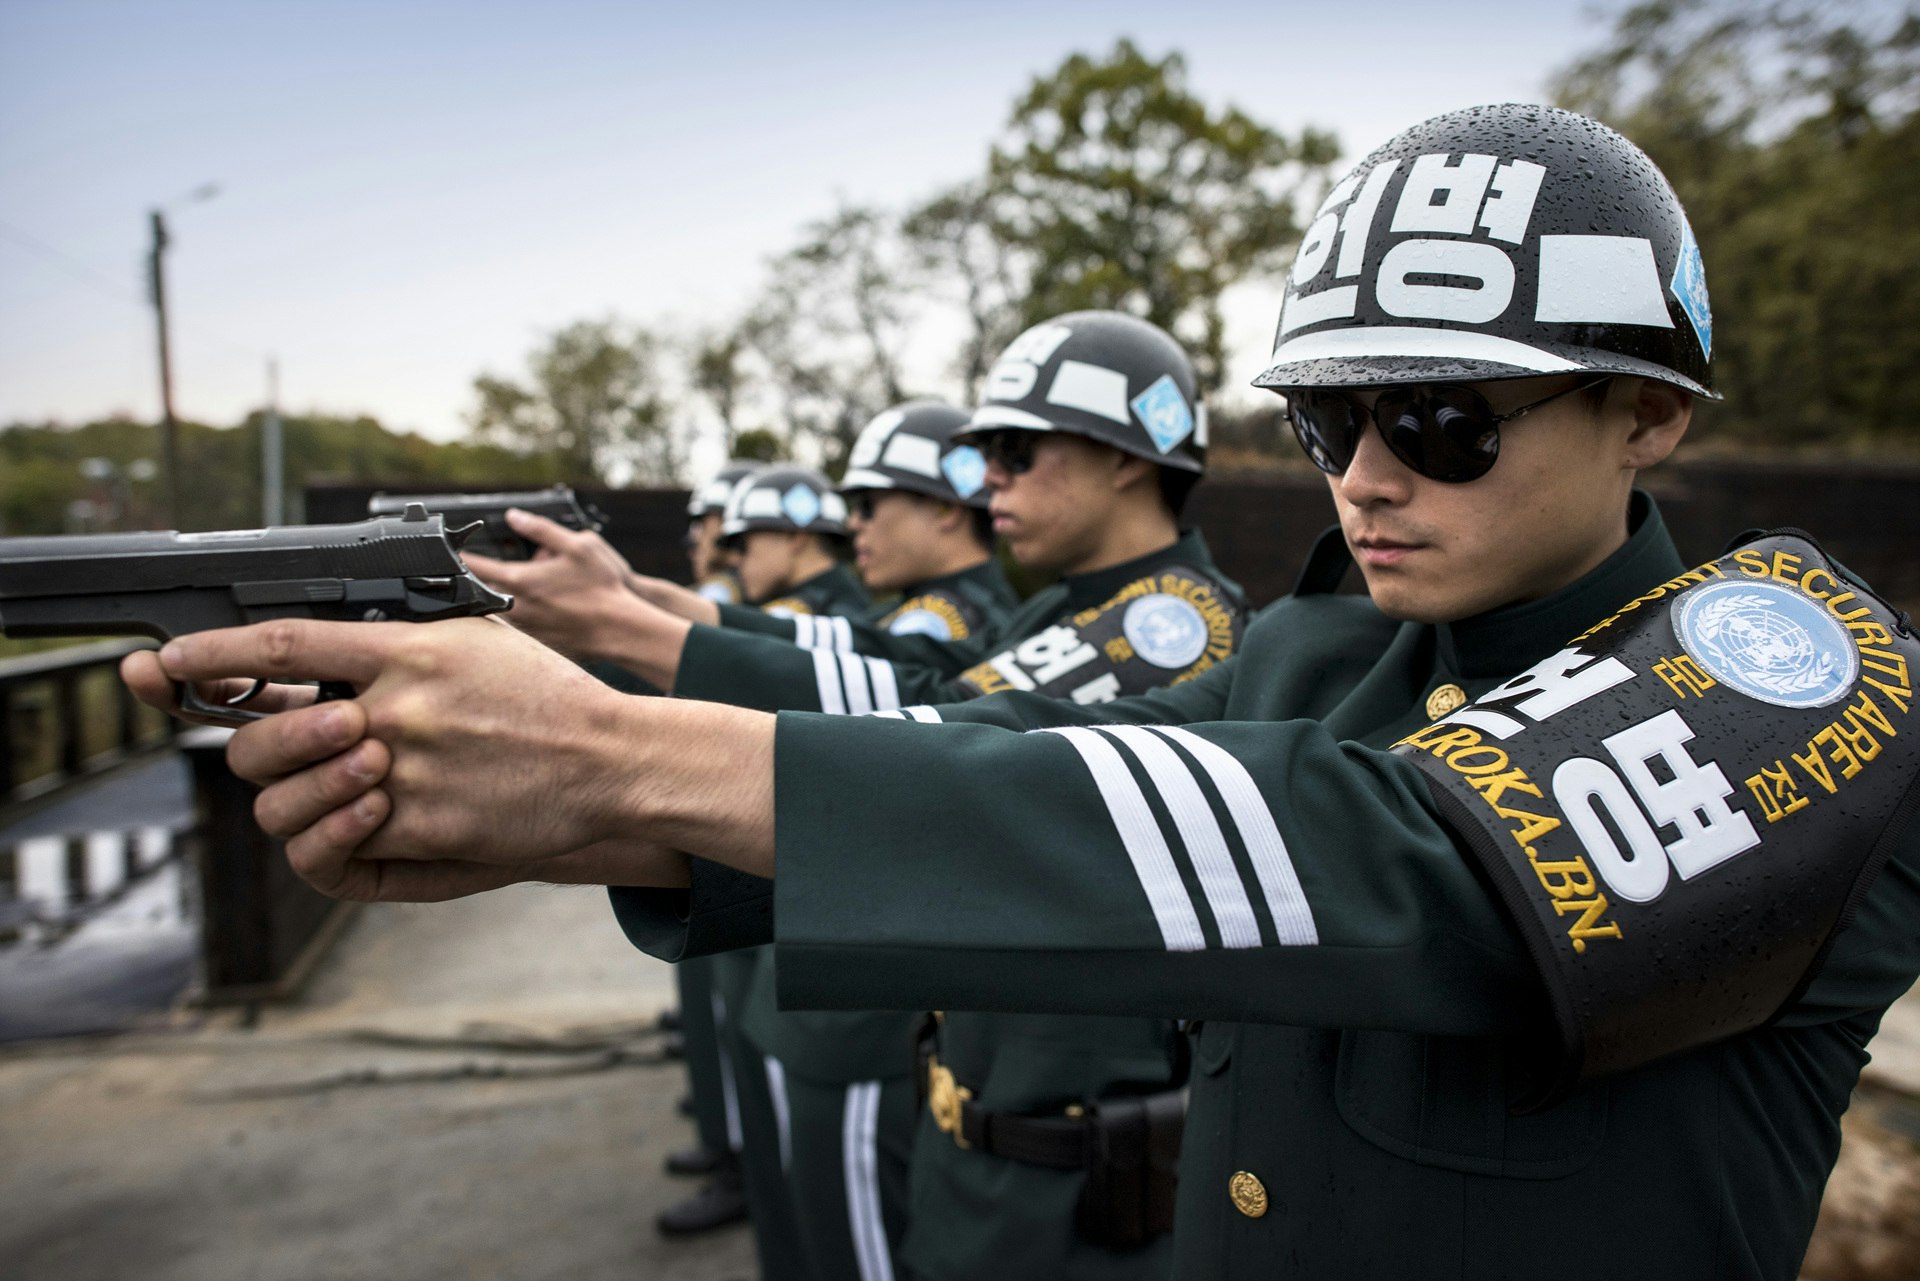 South Korean JSA (Joint Security Area) cordon soldiers practice pistol shooting at the firing range.